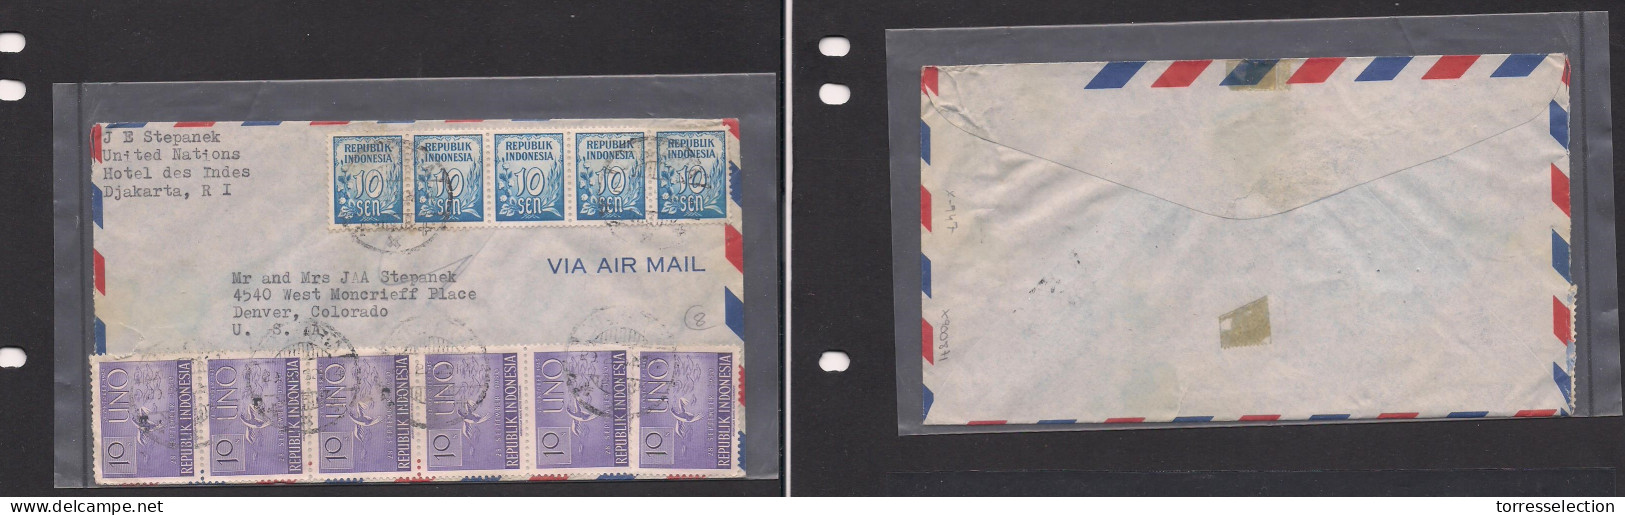 DUTCH INDIES. Dutch Indies - Cover - Indonesia 1952 Air Mult Fkd Env Mixed Issues, Nice. Easy Deal. - Indonesië